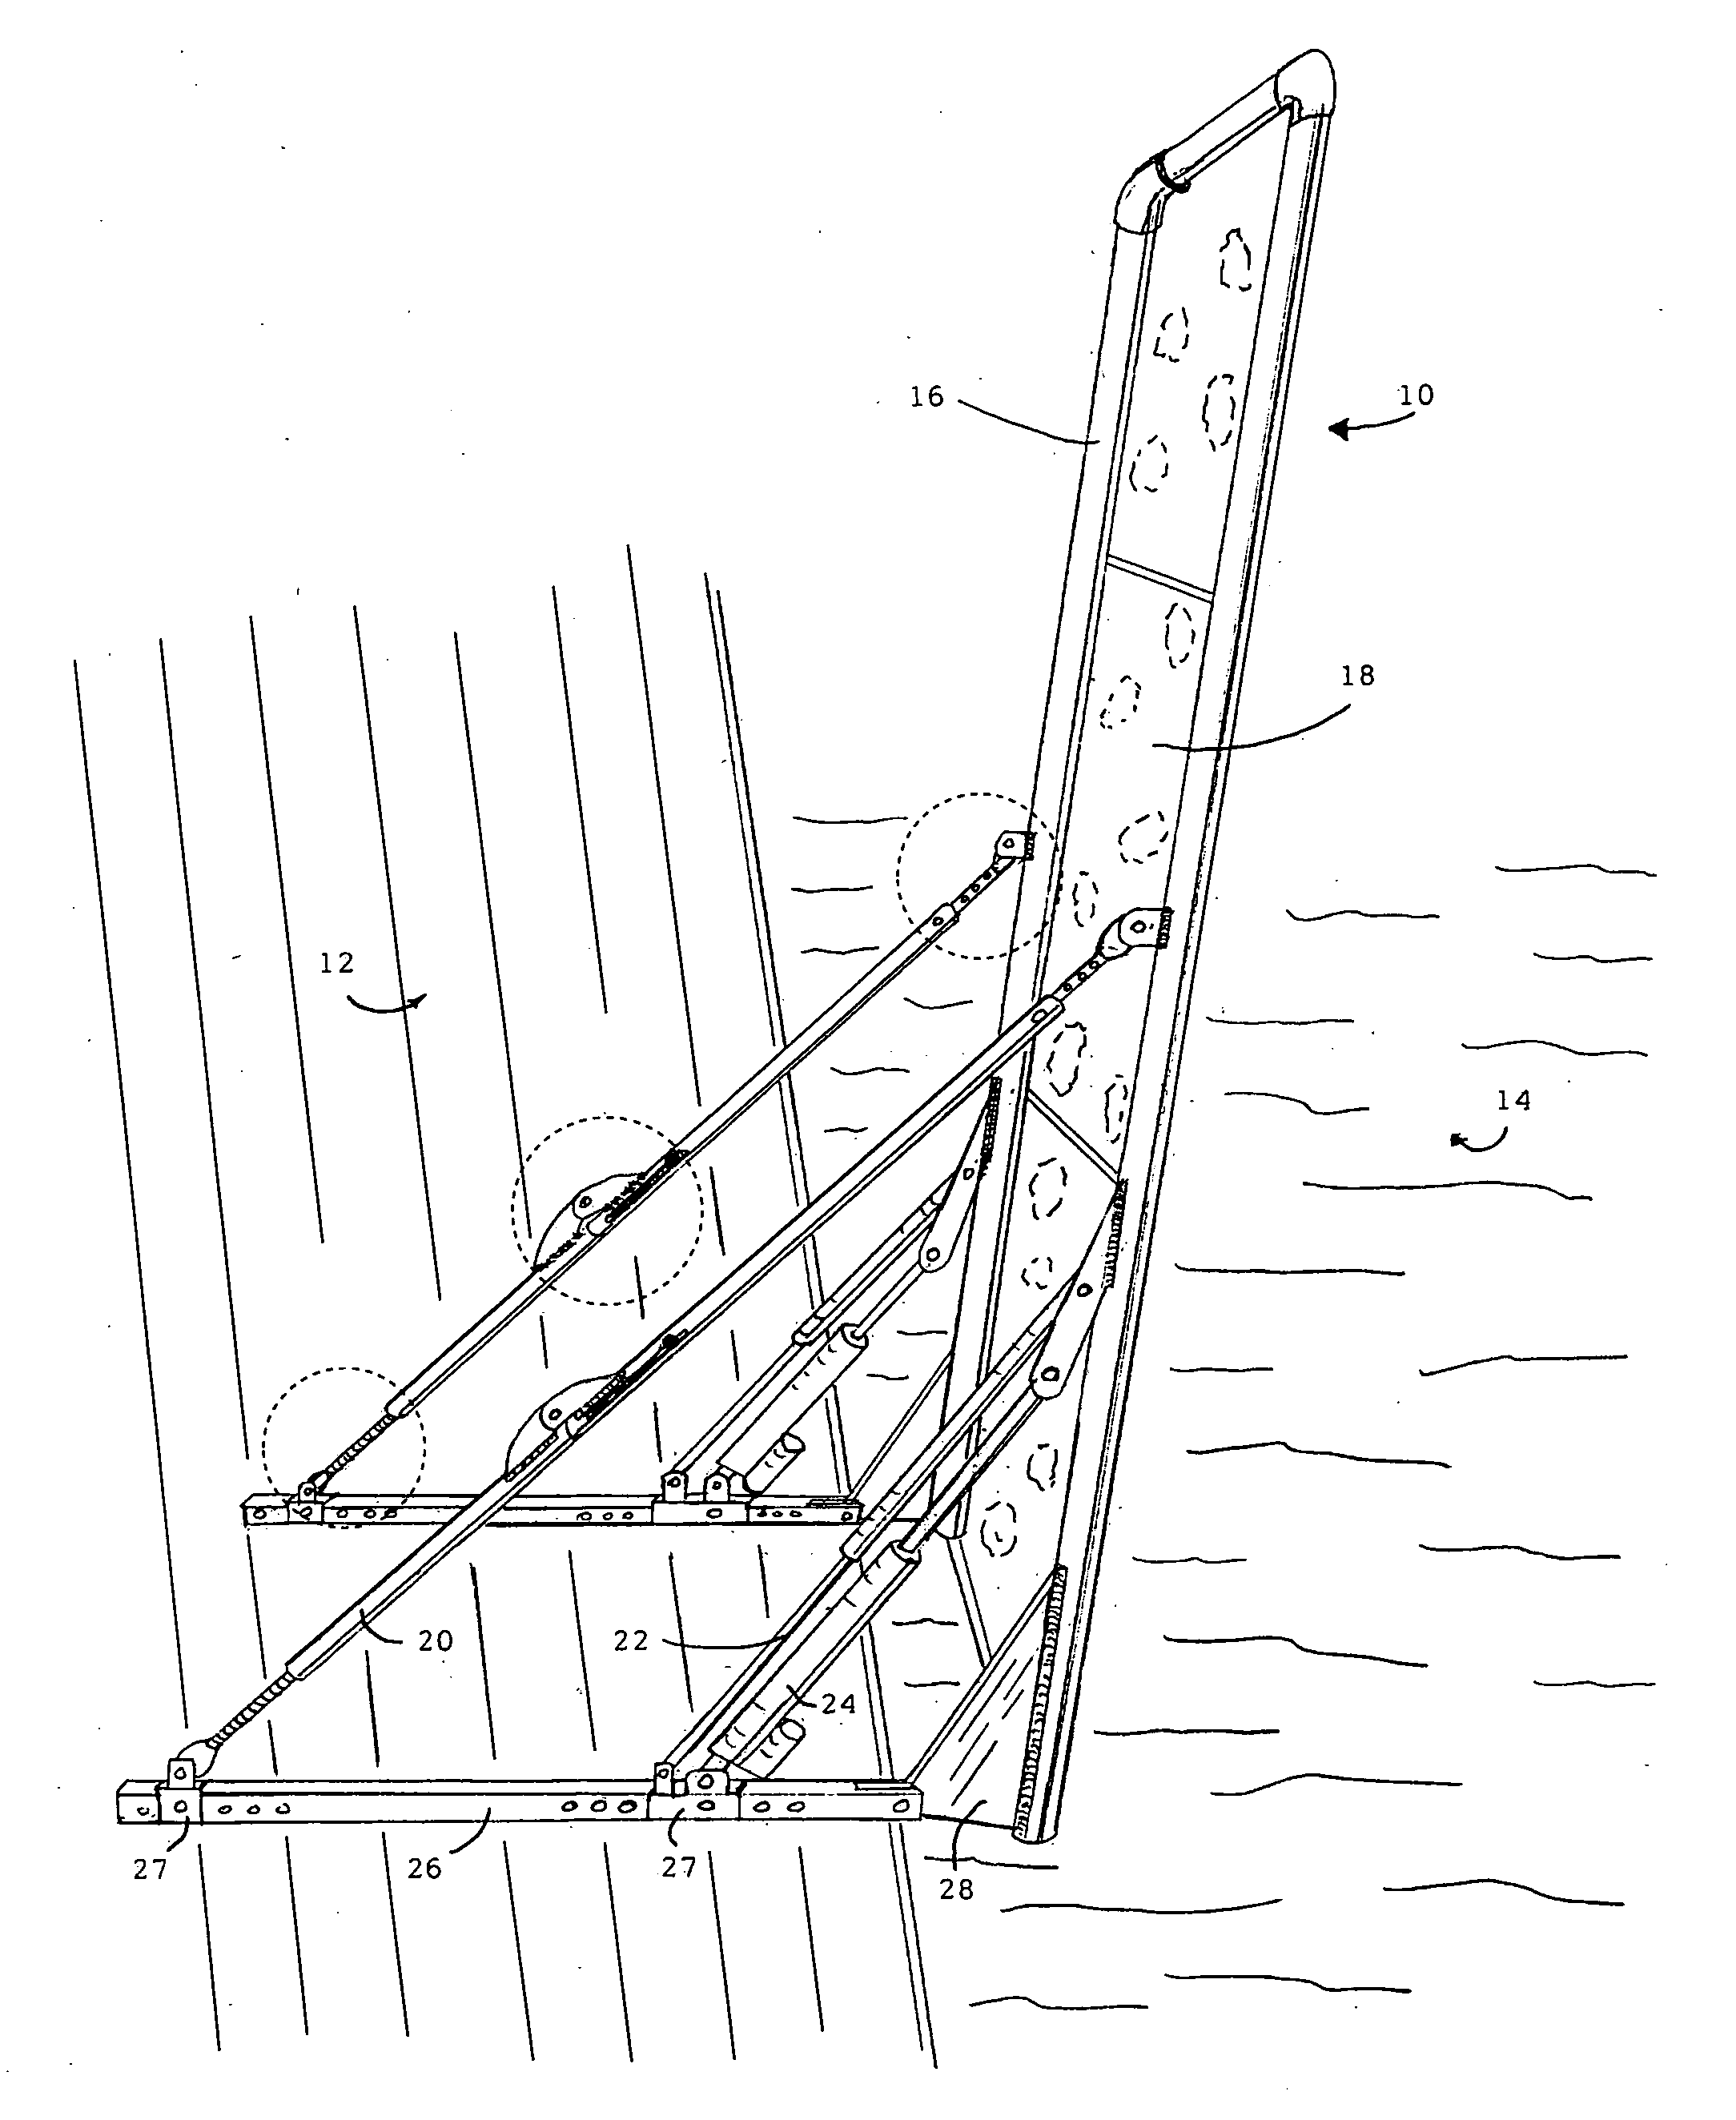 Artificial rock climbing systems and methods adapted for water environment